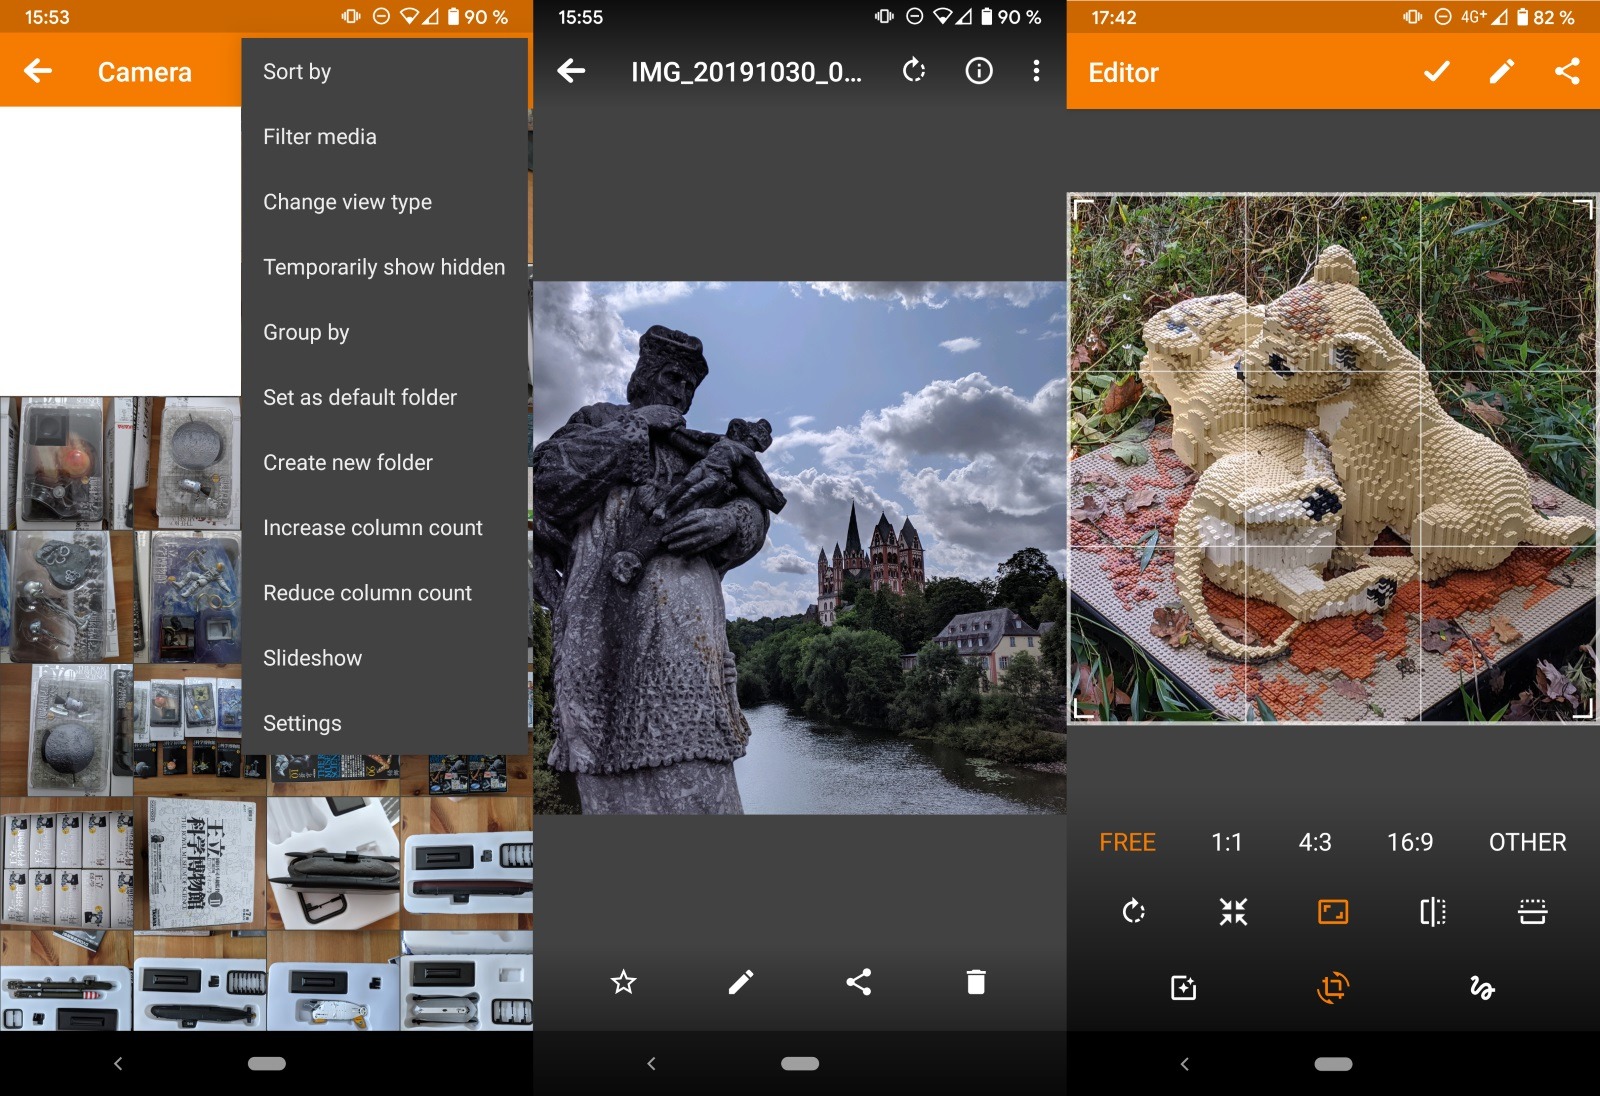 Simple Gallery Pro for Android is a local Google Photos alternative